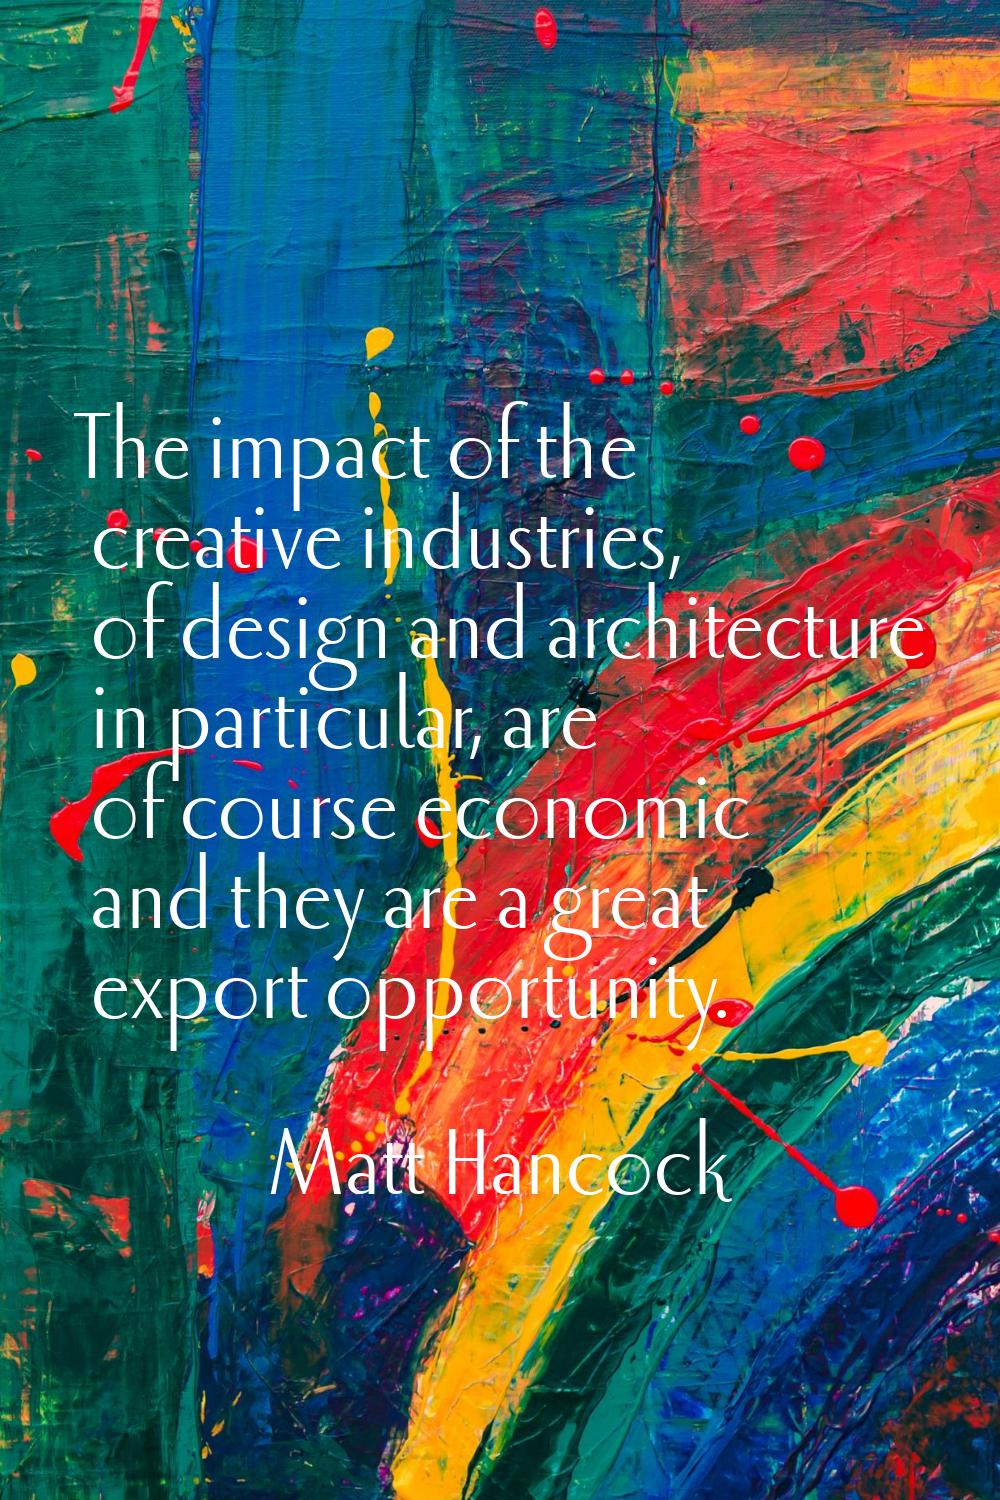 The impact of the creative industries, of design and architecture in particular, are of course econ